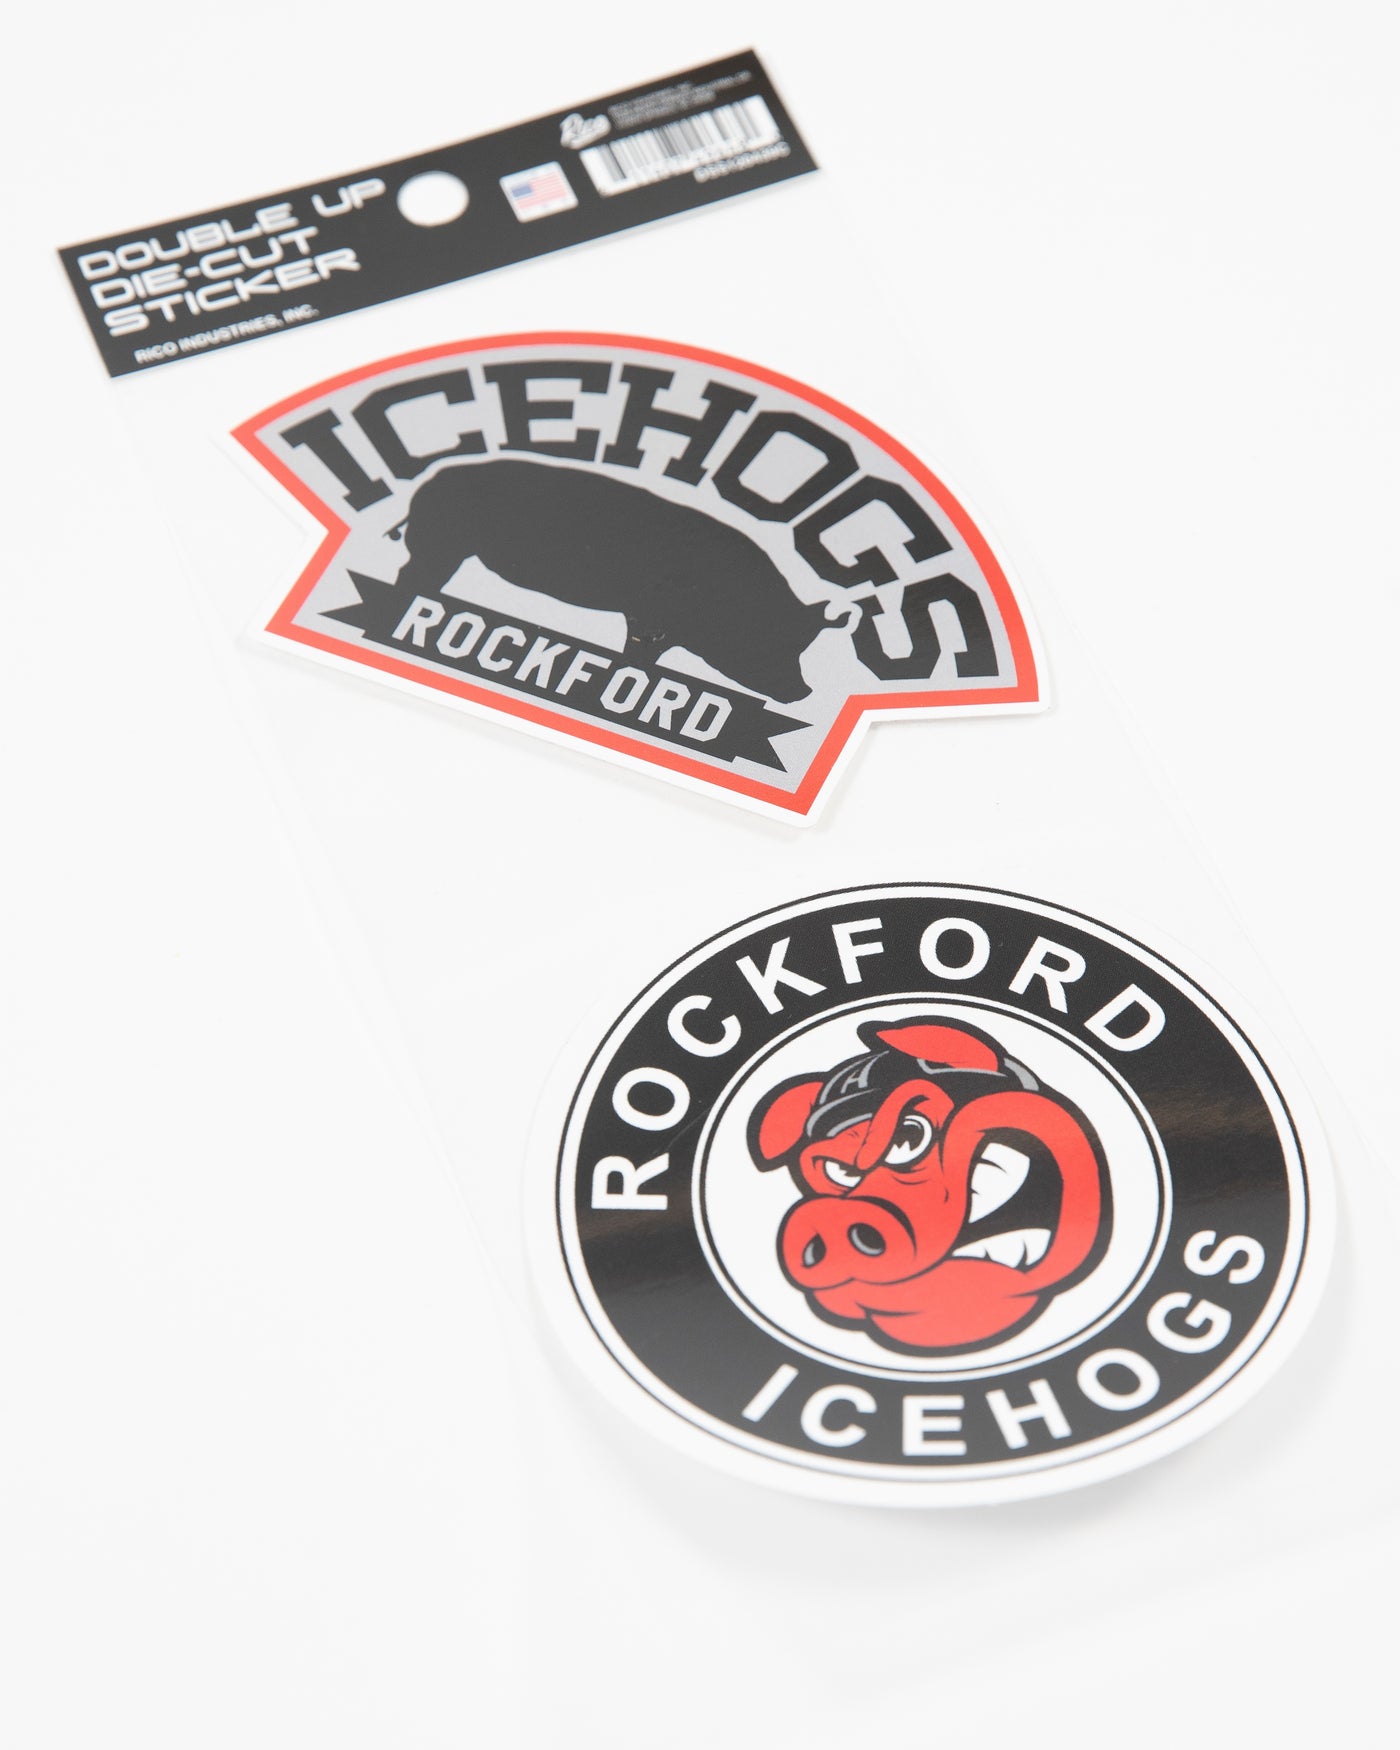 Rockford IceHogs double up die-cut stickers - angled lay flat